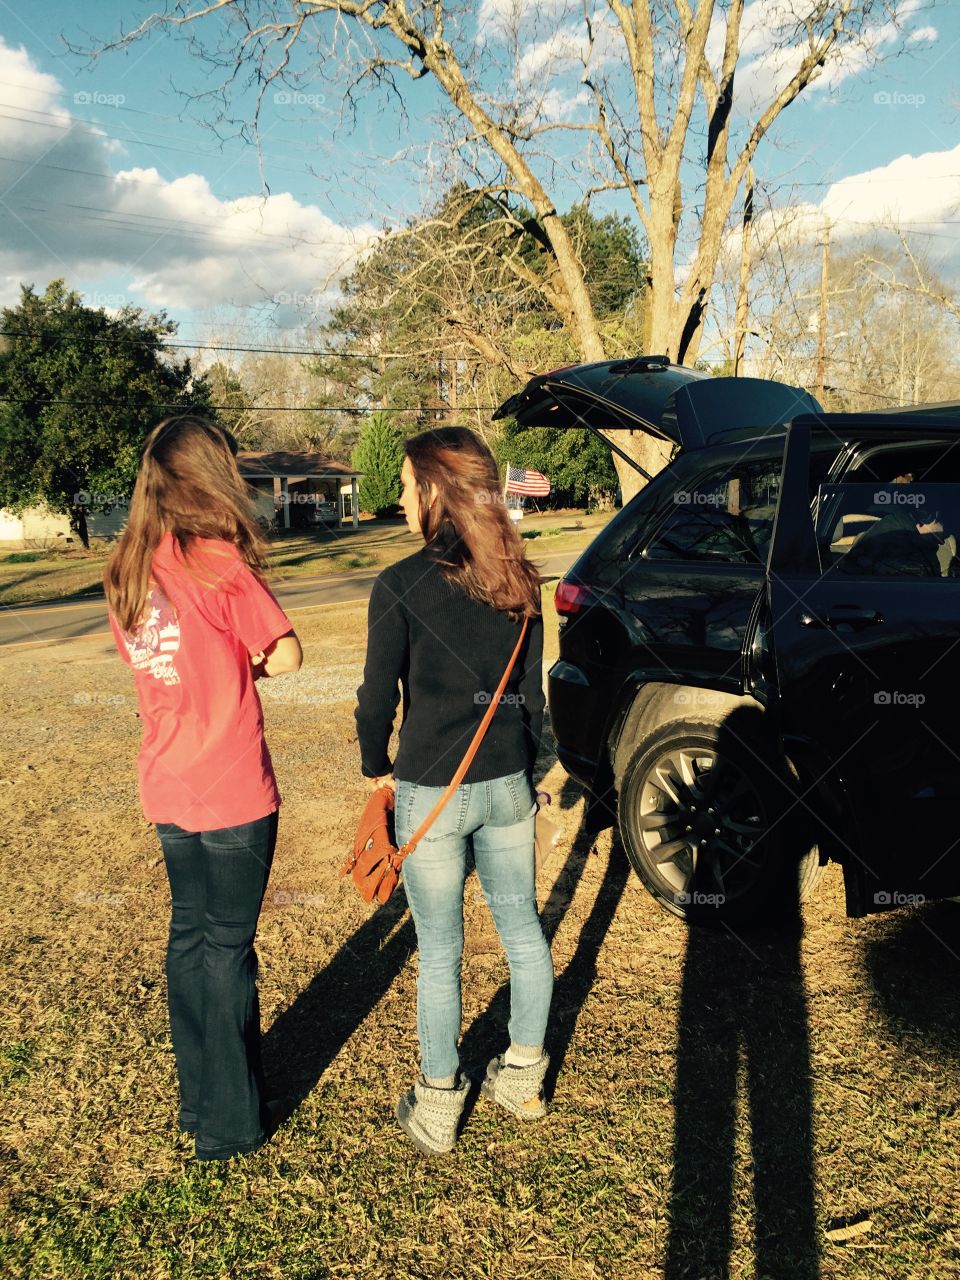 Two young women outdoors standing with their backs to the camera and a vehicle showing.